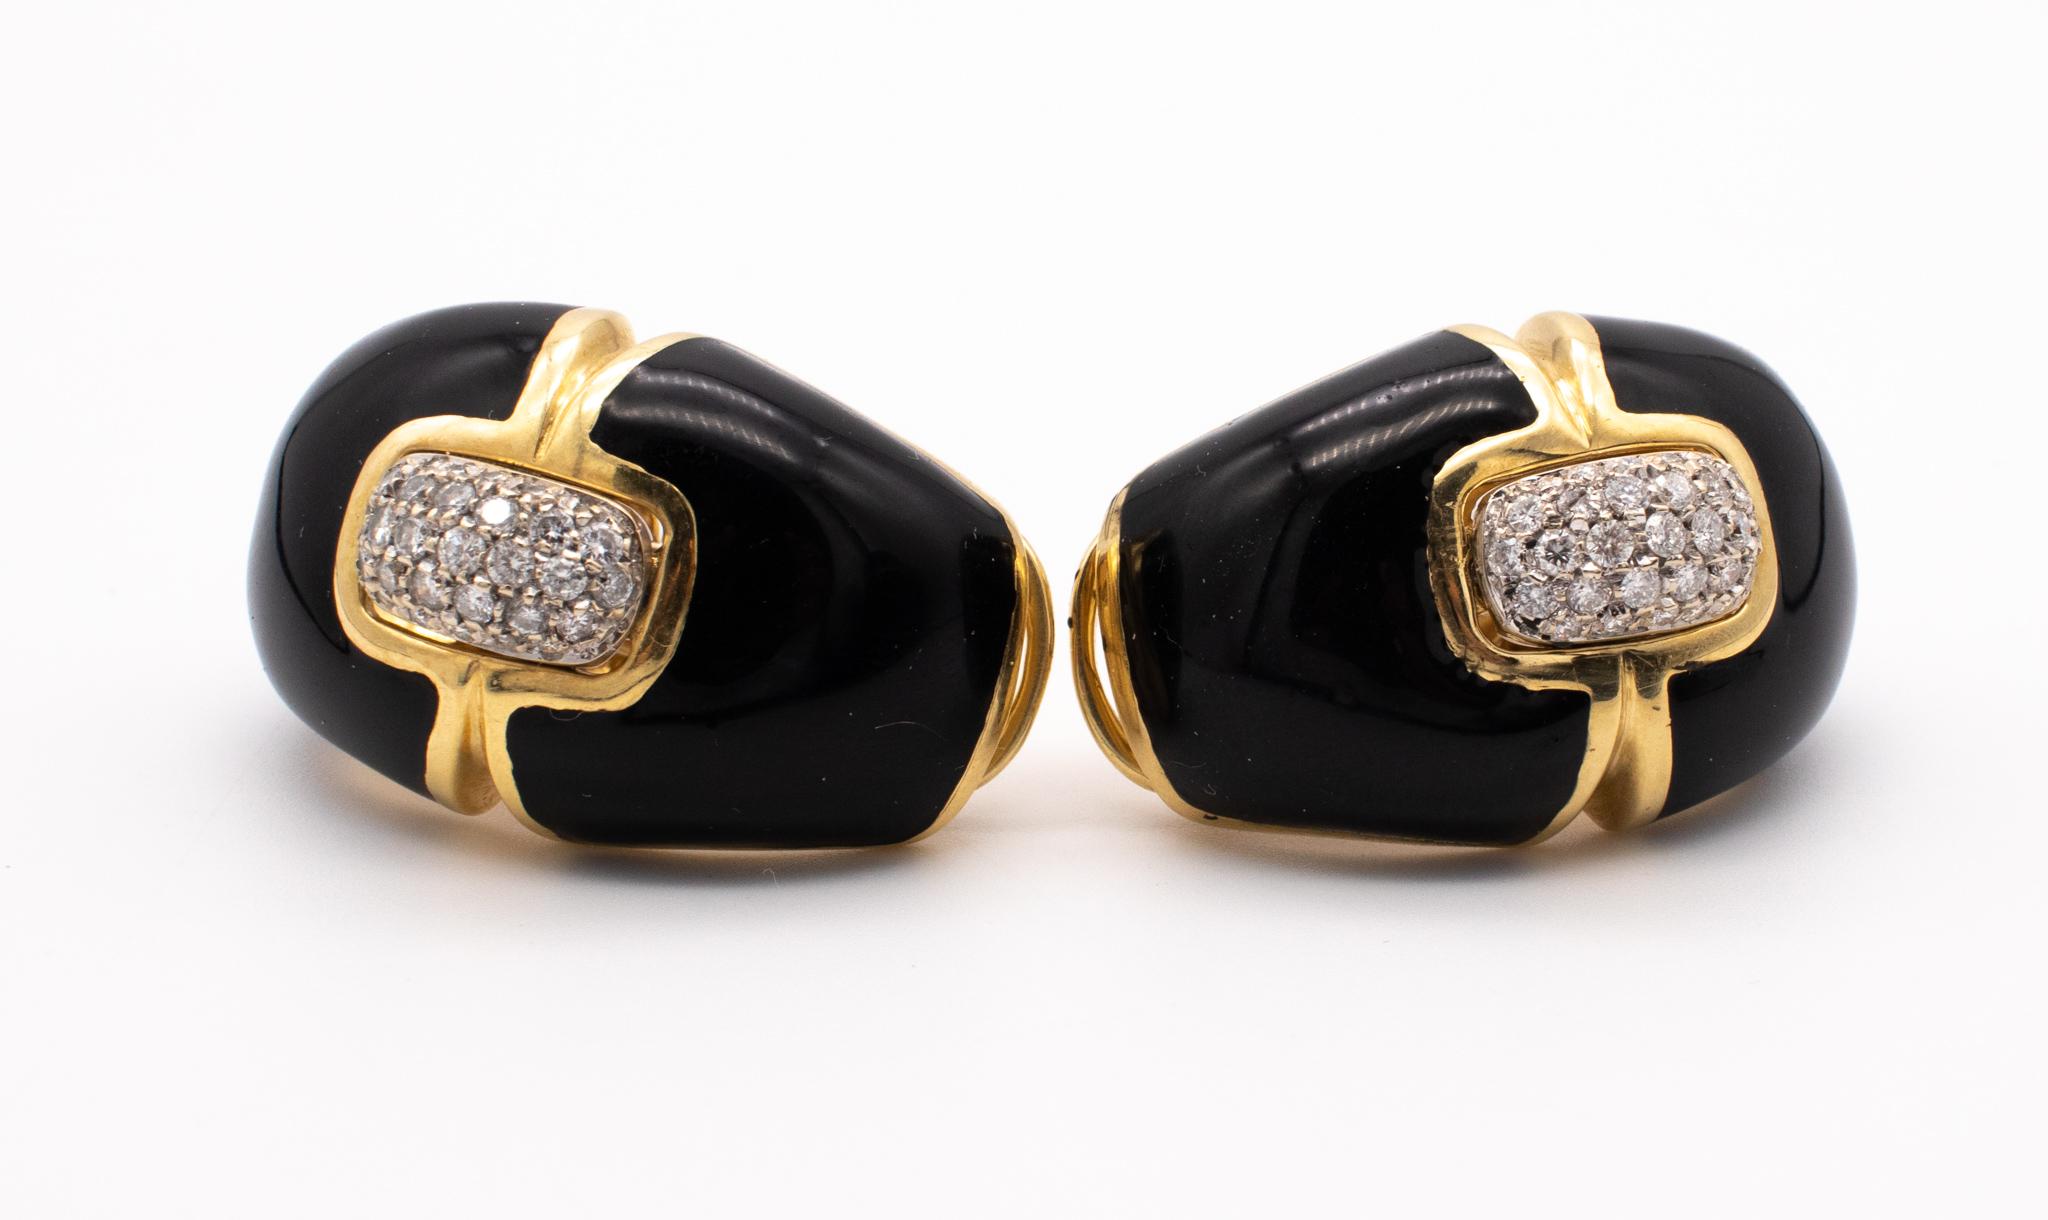 Roberto Legnazzi 1970 Earrings 18Kt Gold With Black Enamel And 1.16 Ctw Diamonds For Sale 1